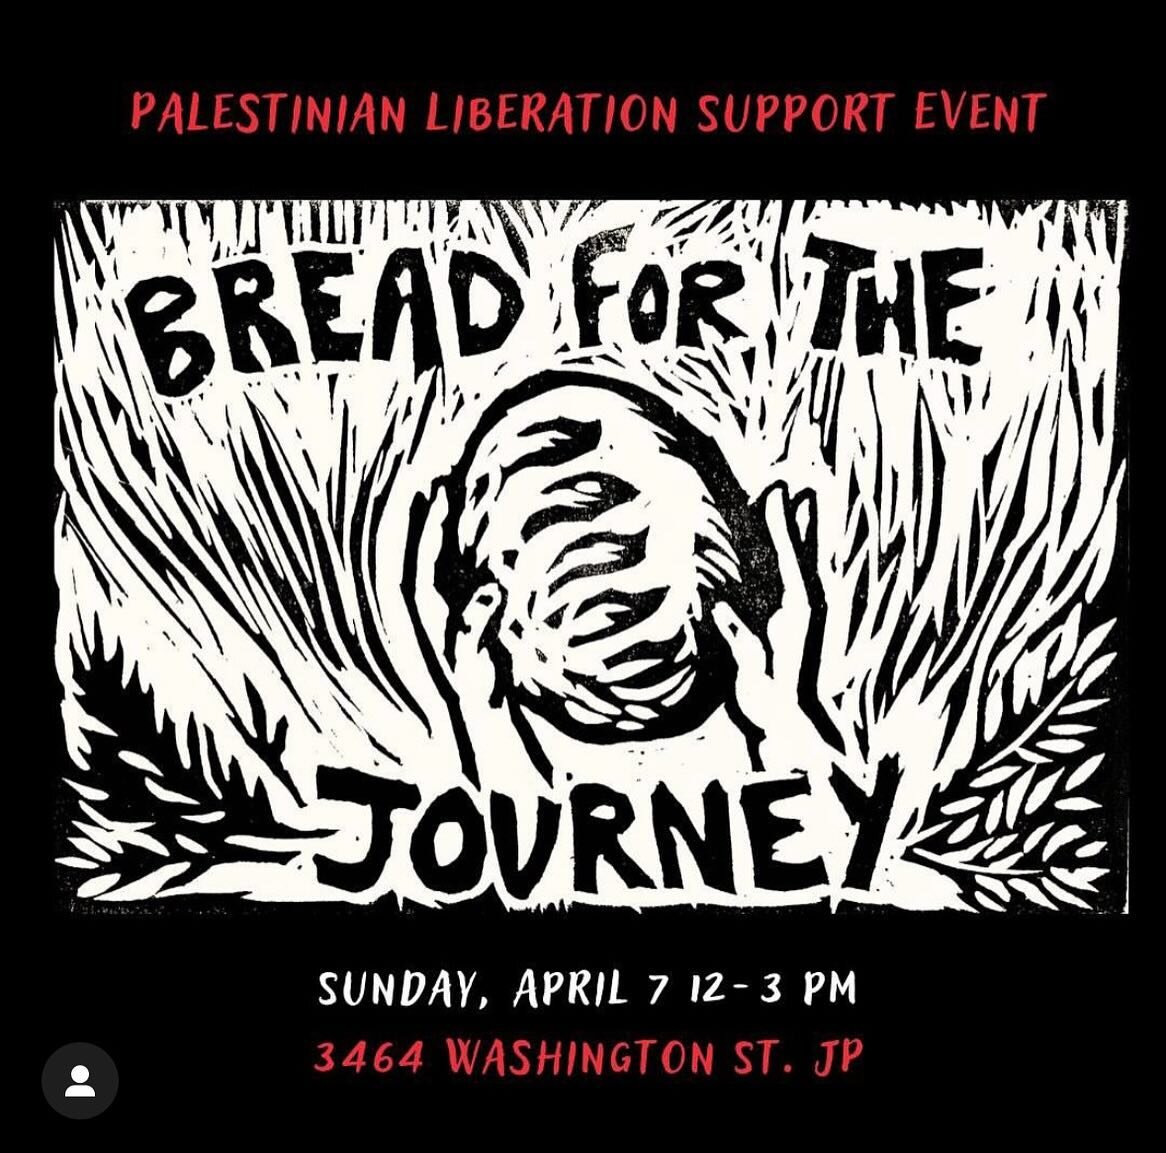 See you Sunday at @themeetingpointjp for another round of what we&rsquo;ve begun to call Bread for the Journey: a Palestinian liberation support event.

A community event for alchemizing grief through togetherness&hellip; and sustaining our journey t